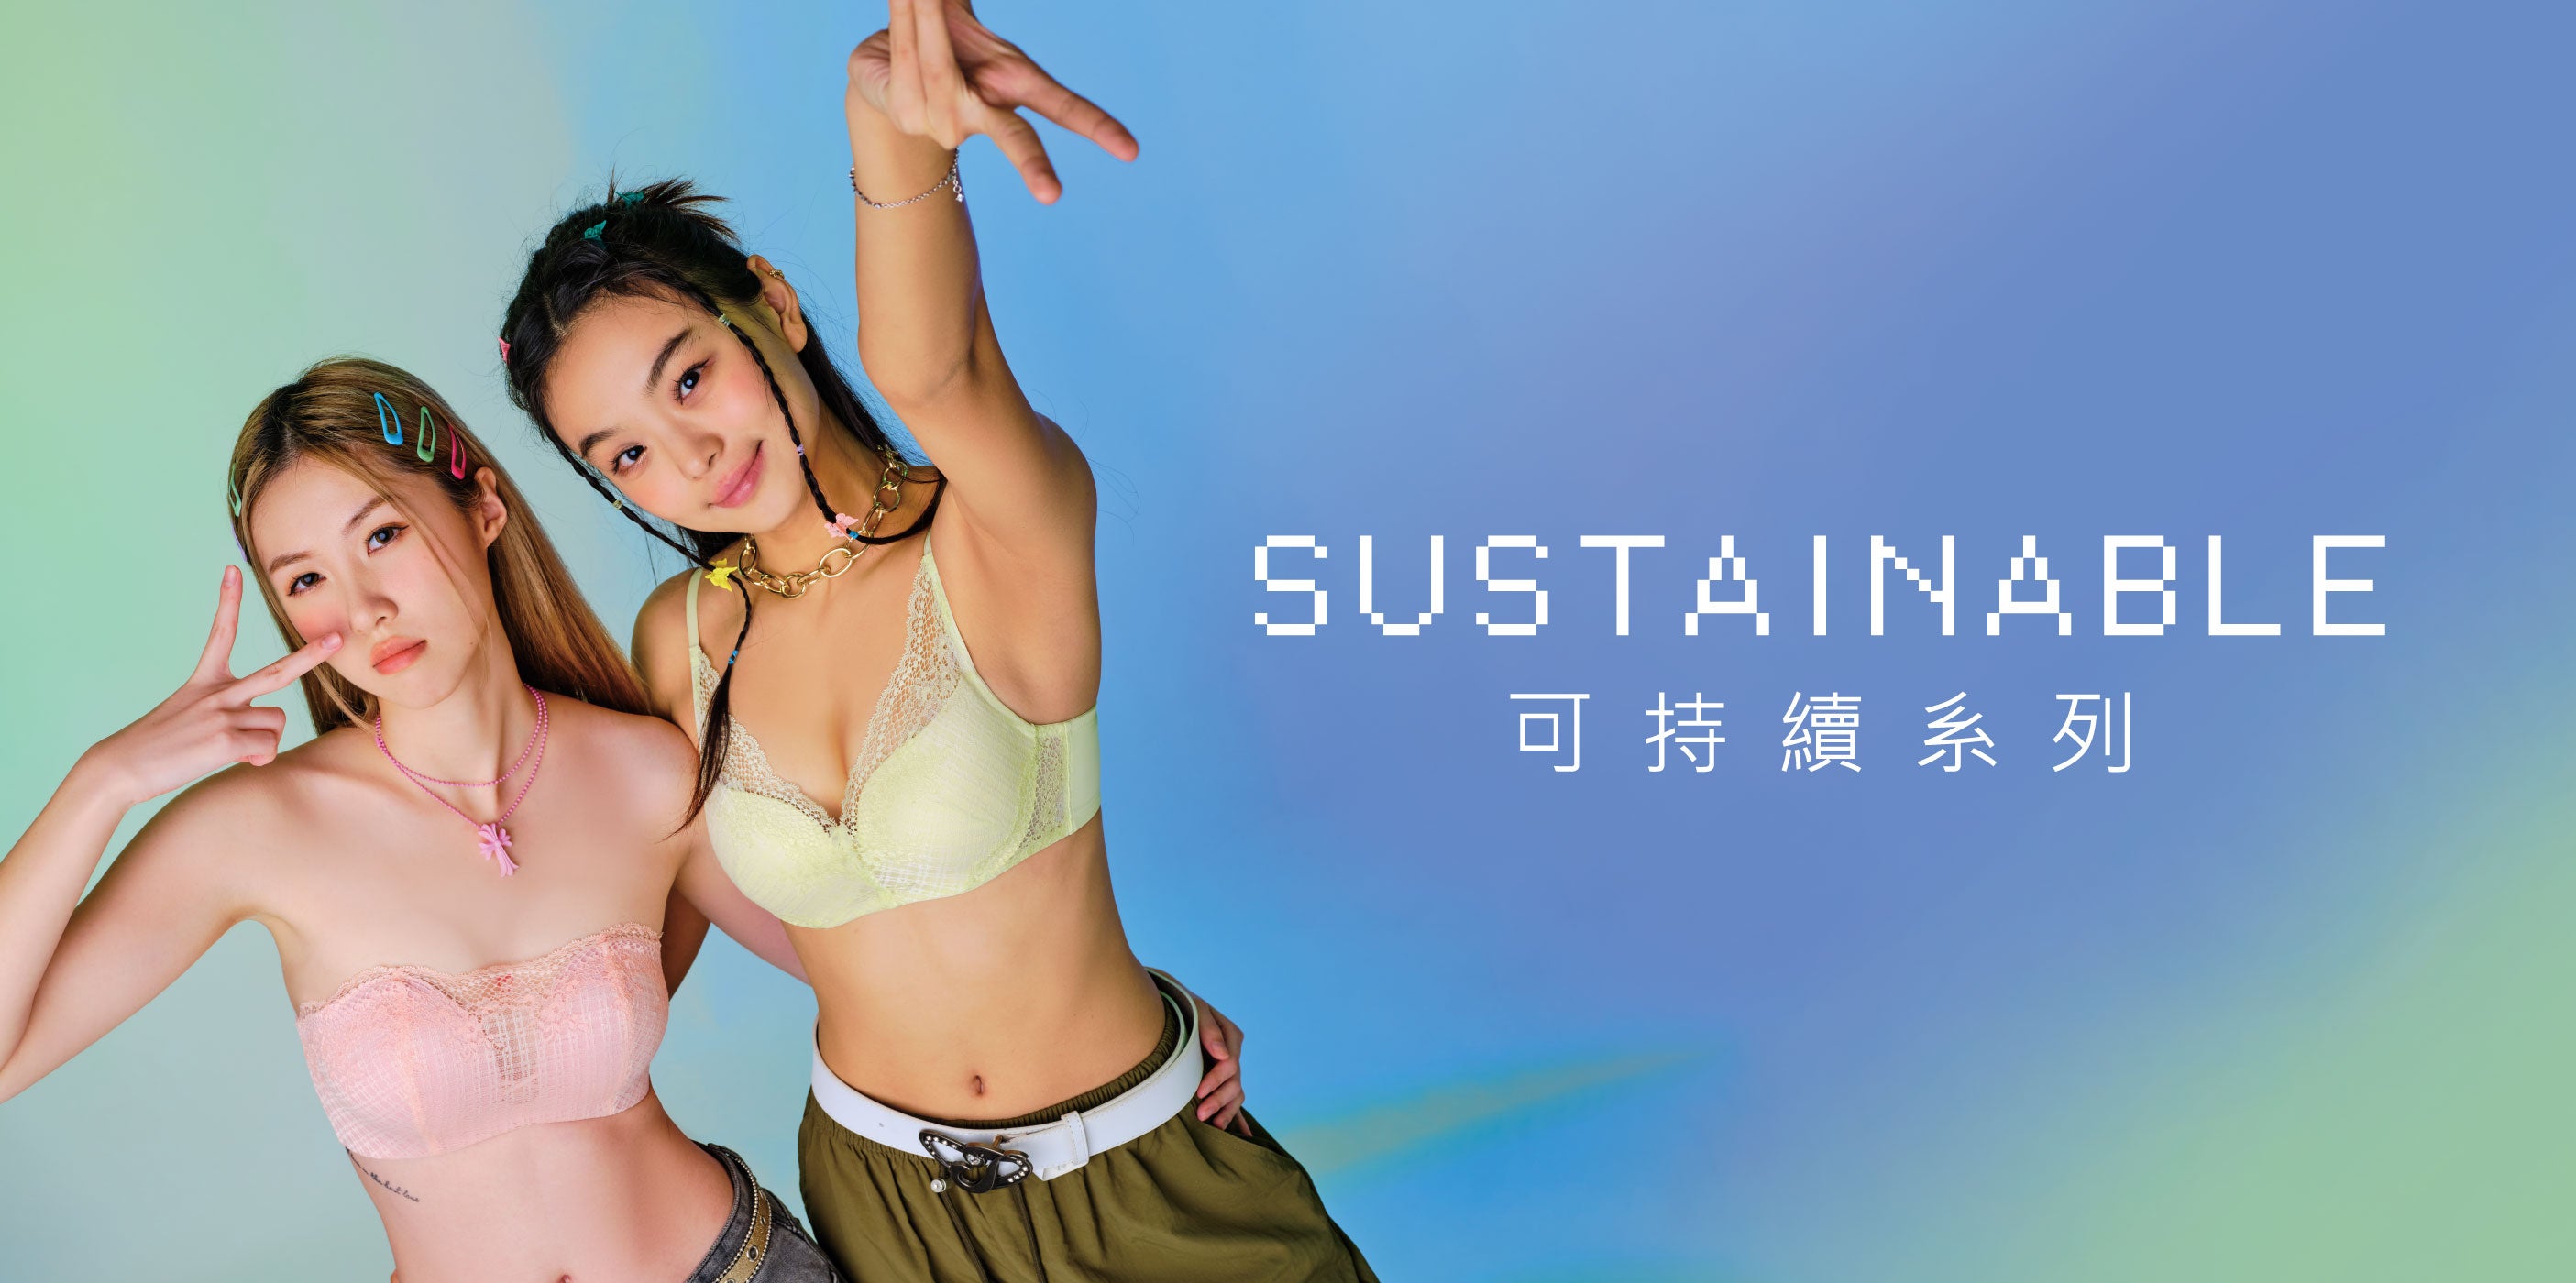 Sustainable (Bra) – Her own words